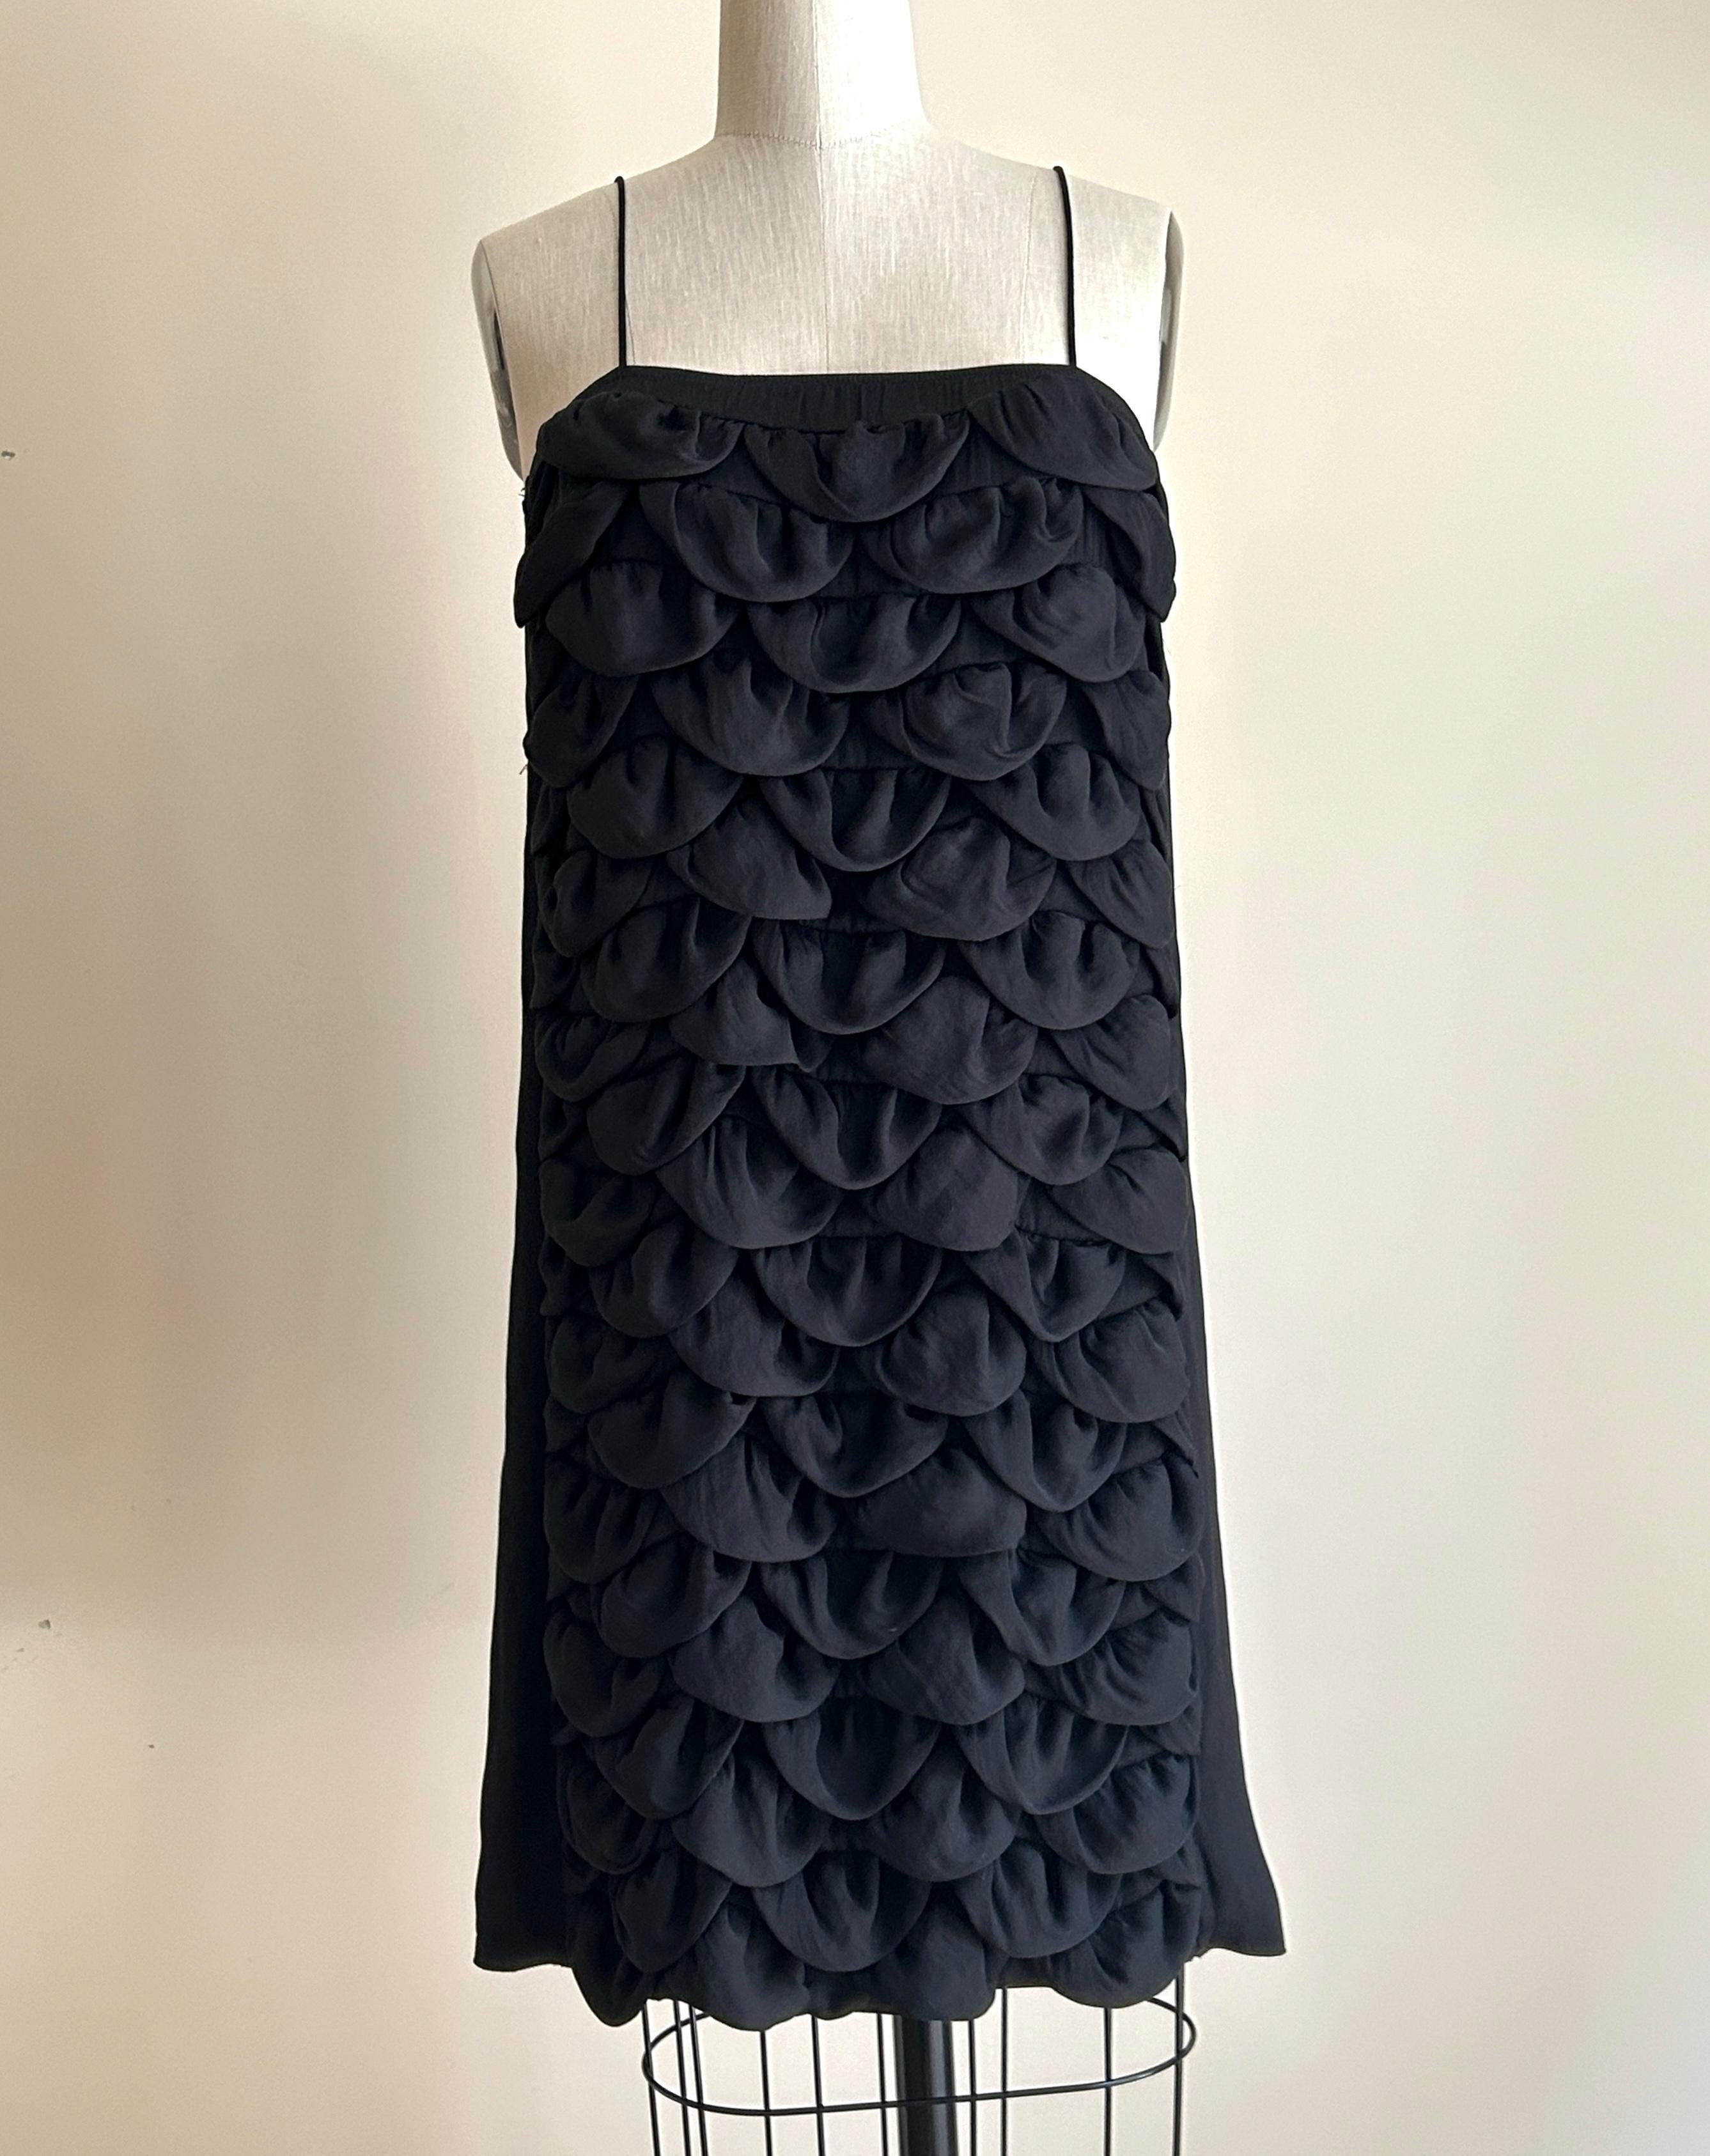 Chanel vintage 2000s black sleeveless dress with tiers of petal shaped fabric at front. From the Cruise 2009 collection. Metal CC logo at back top. 

Lightweight fabric, great as a beach or pool coverup or worn as a casual dress. No closure, pulls